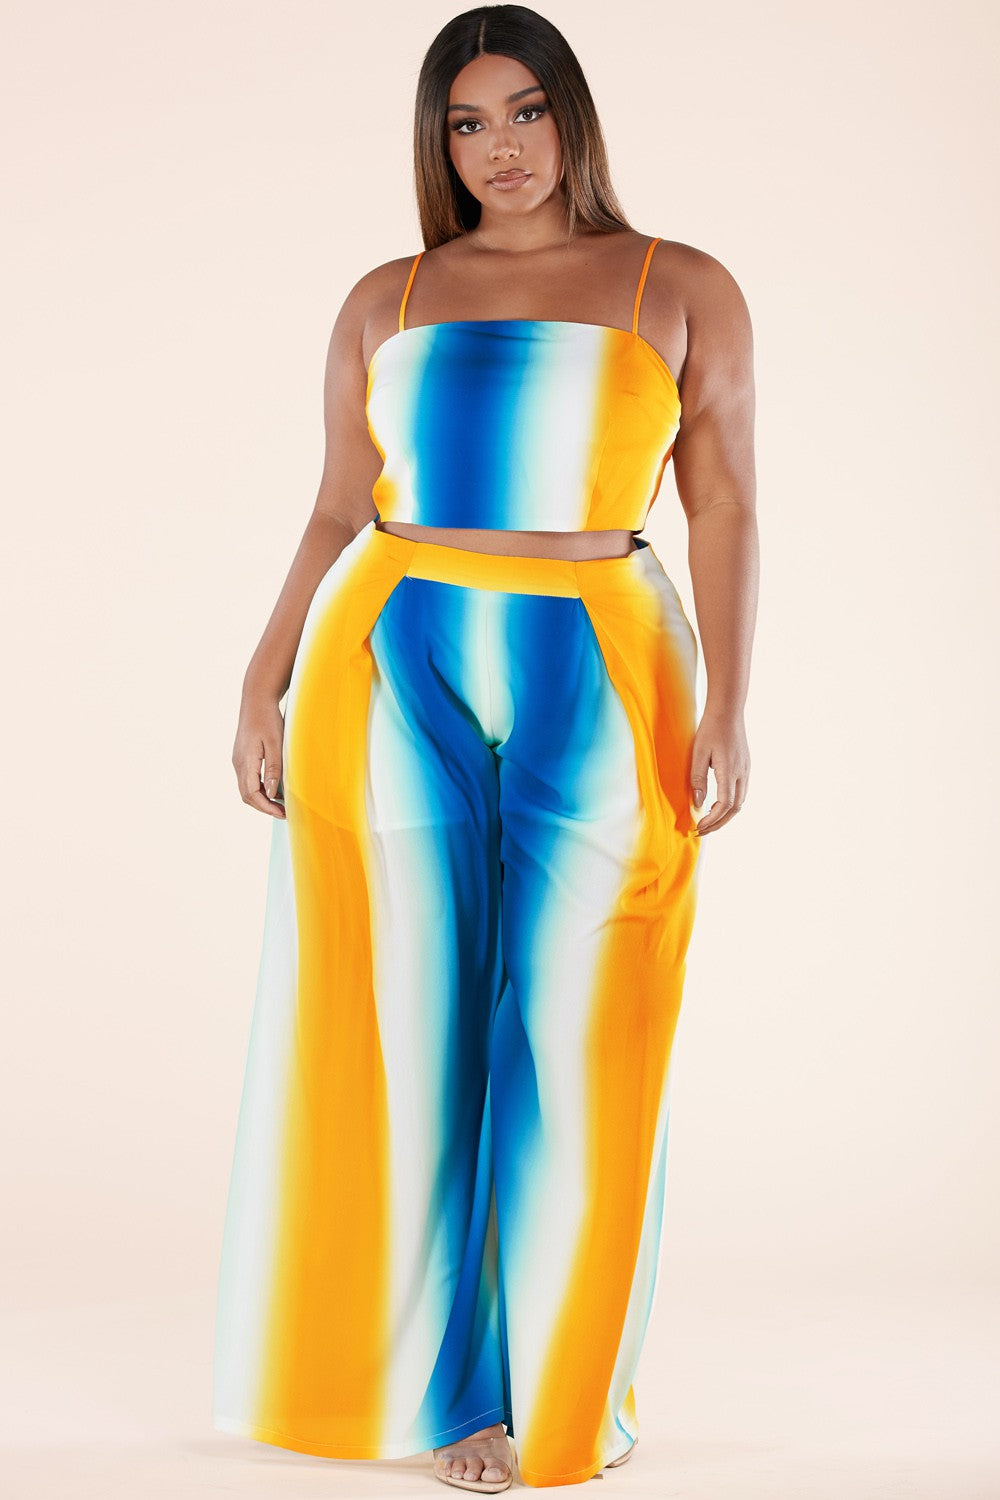 Plus Size 2-Piece Set Crop Top and Wide Leg Pants in Blue and Yellow